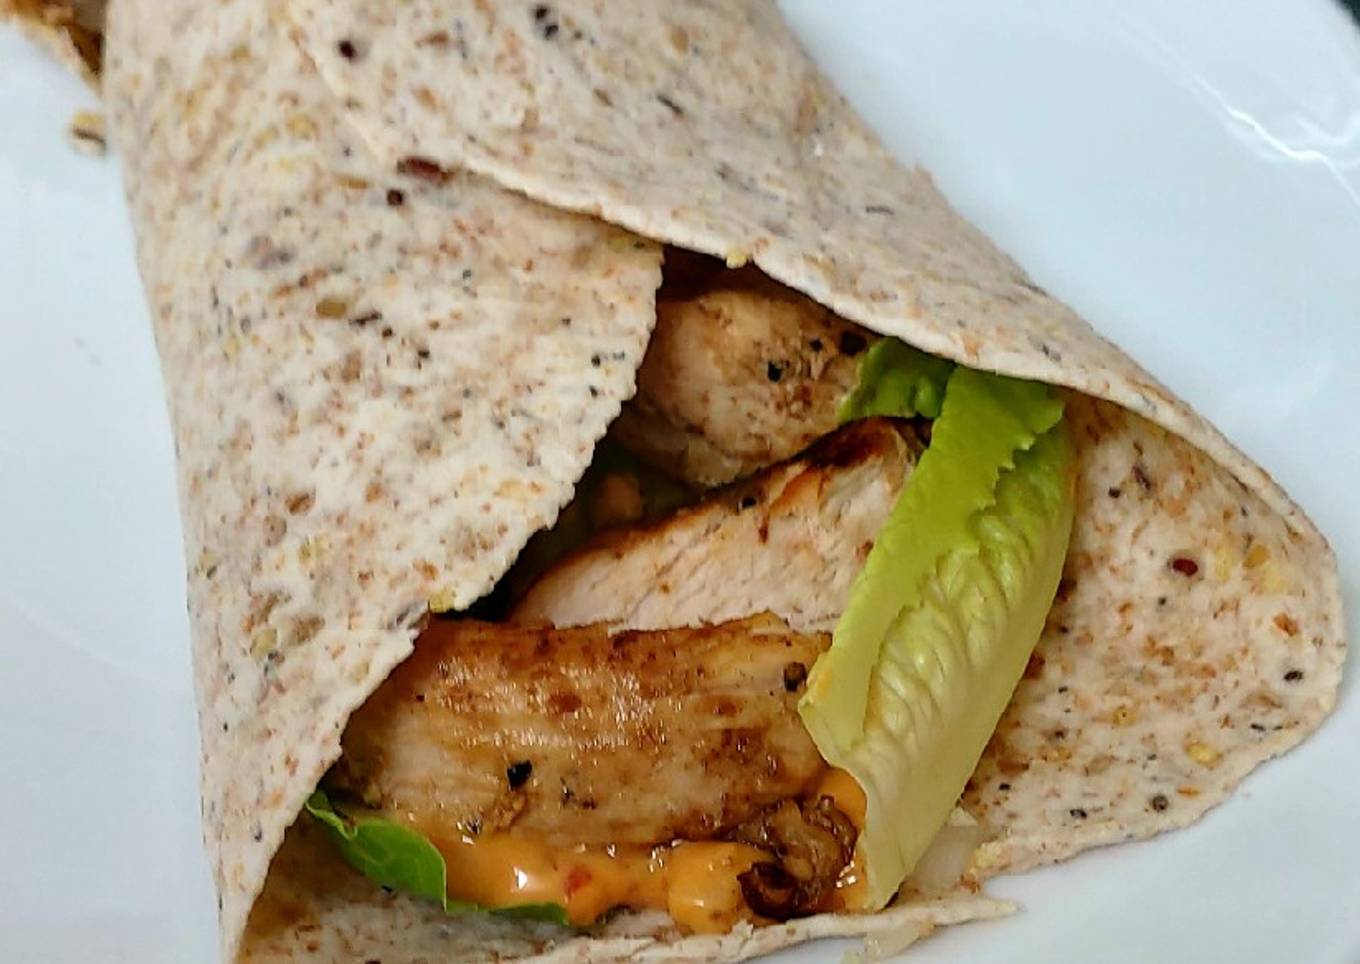 My Char grilled Chicken in a wrap 😋